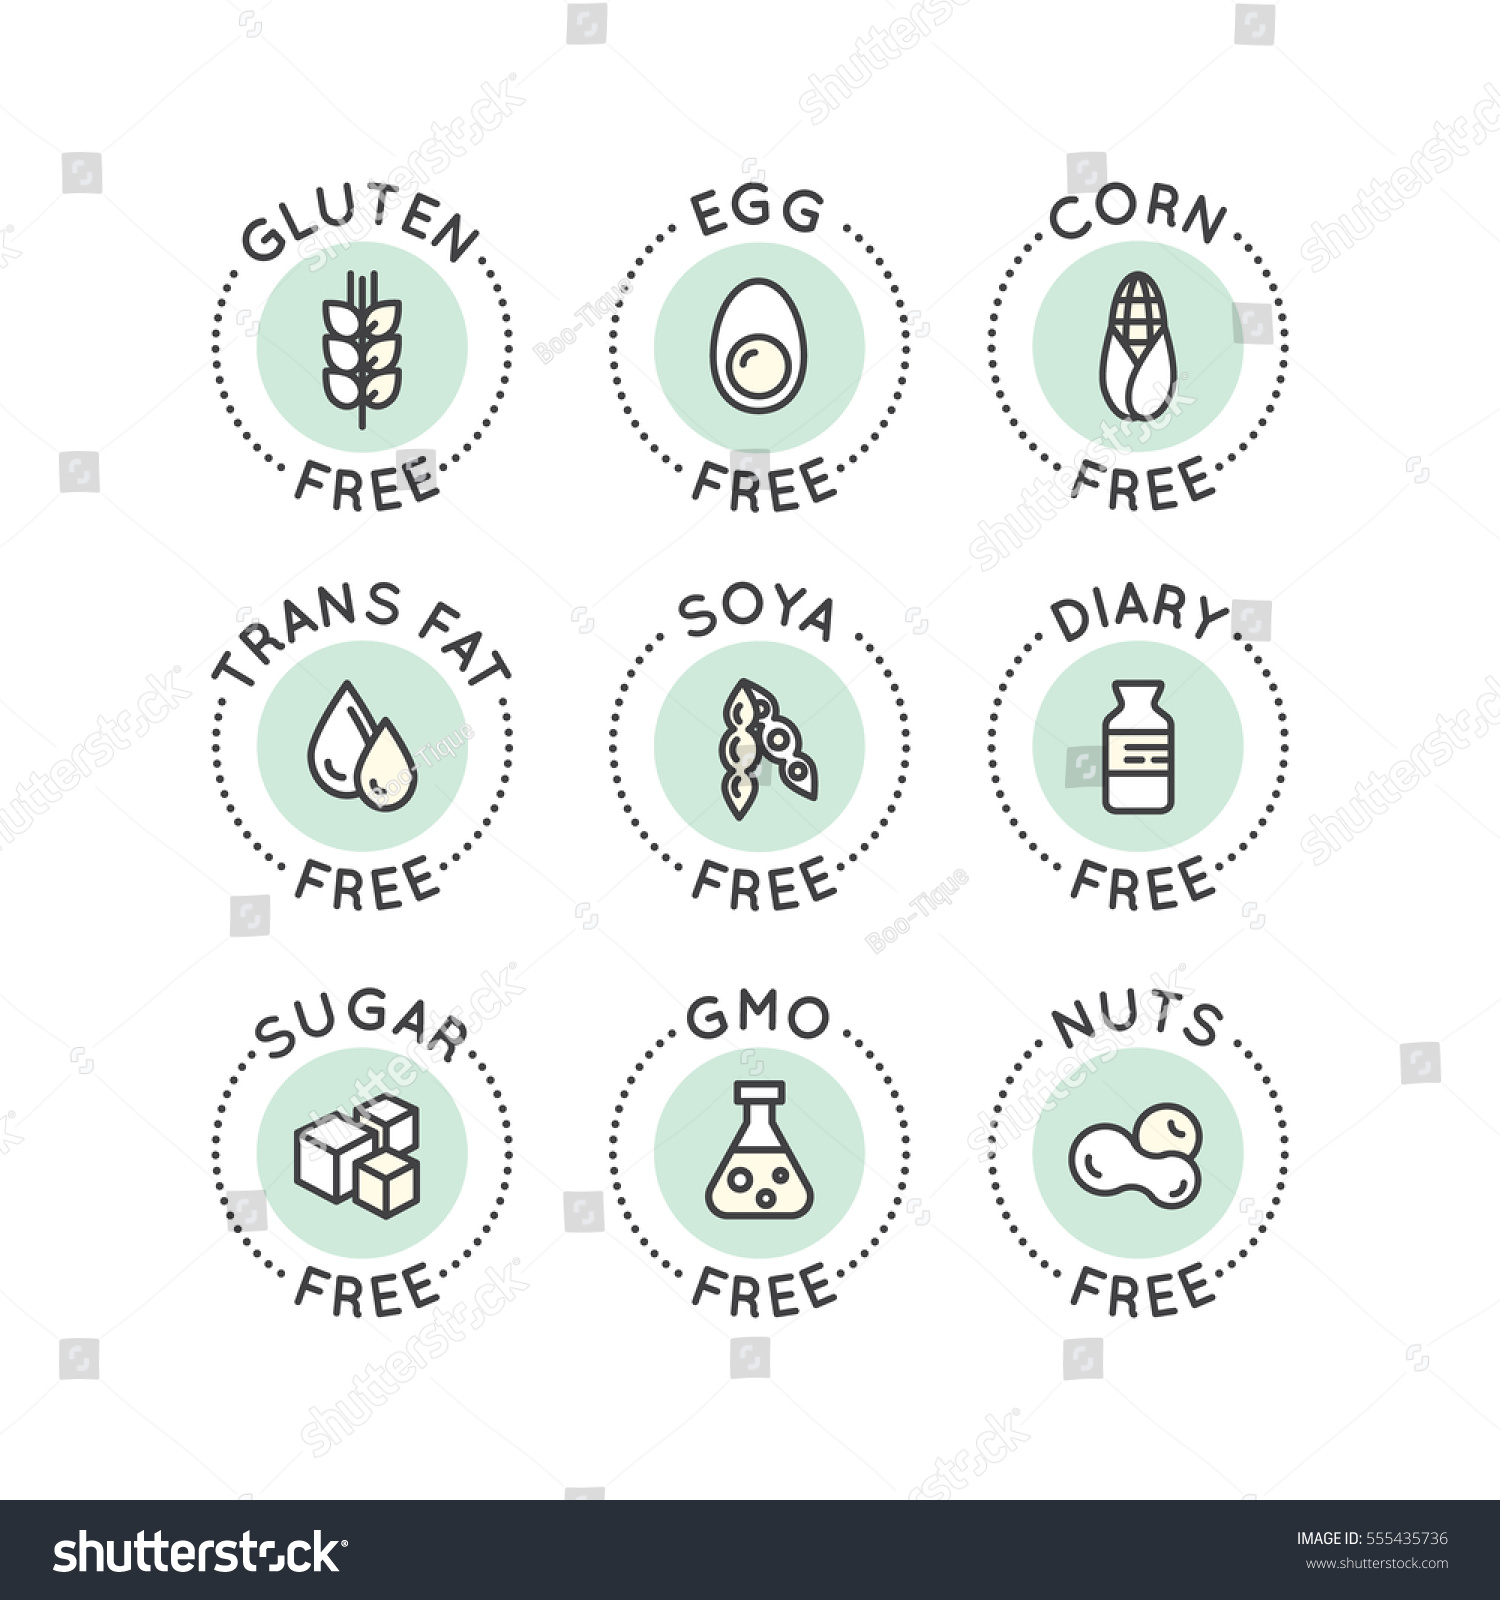 SVG of Isolated Vector Style Illustration Logo Set Badge Ingredient Warning Label Icons. Allergens Gluten, Lactose, Soy, Corn, Diary, Milk, Sugar, Trans Fat. Vegetarian and Organic symbols. Food Intolerance svg